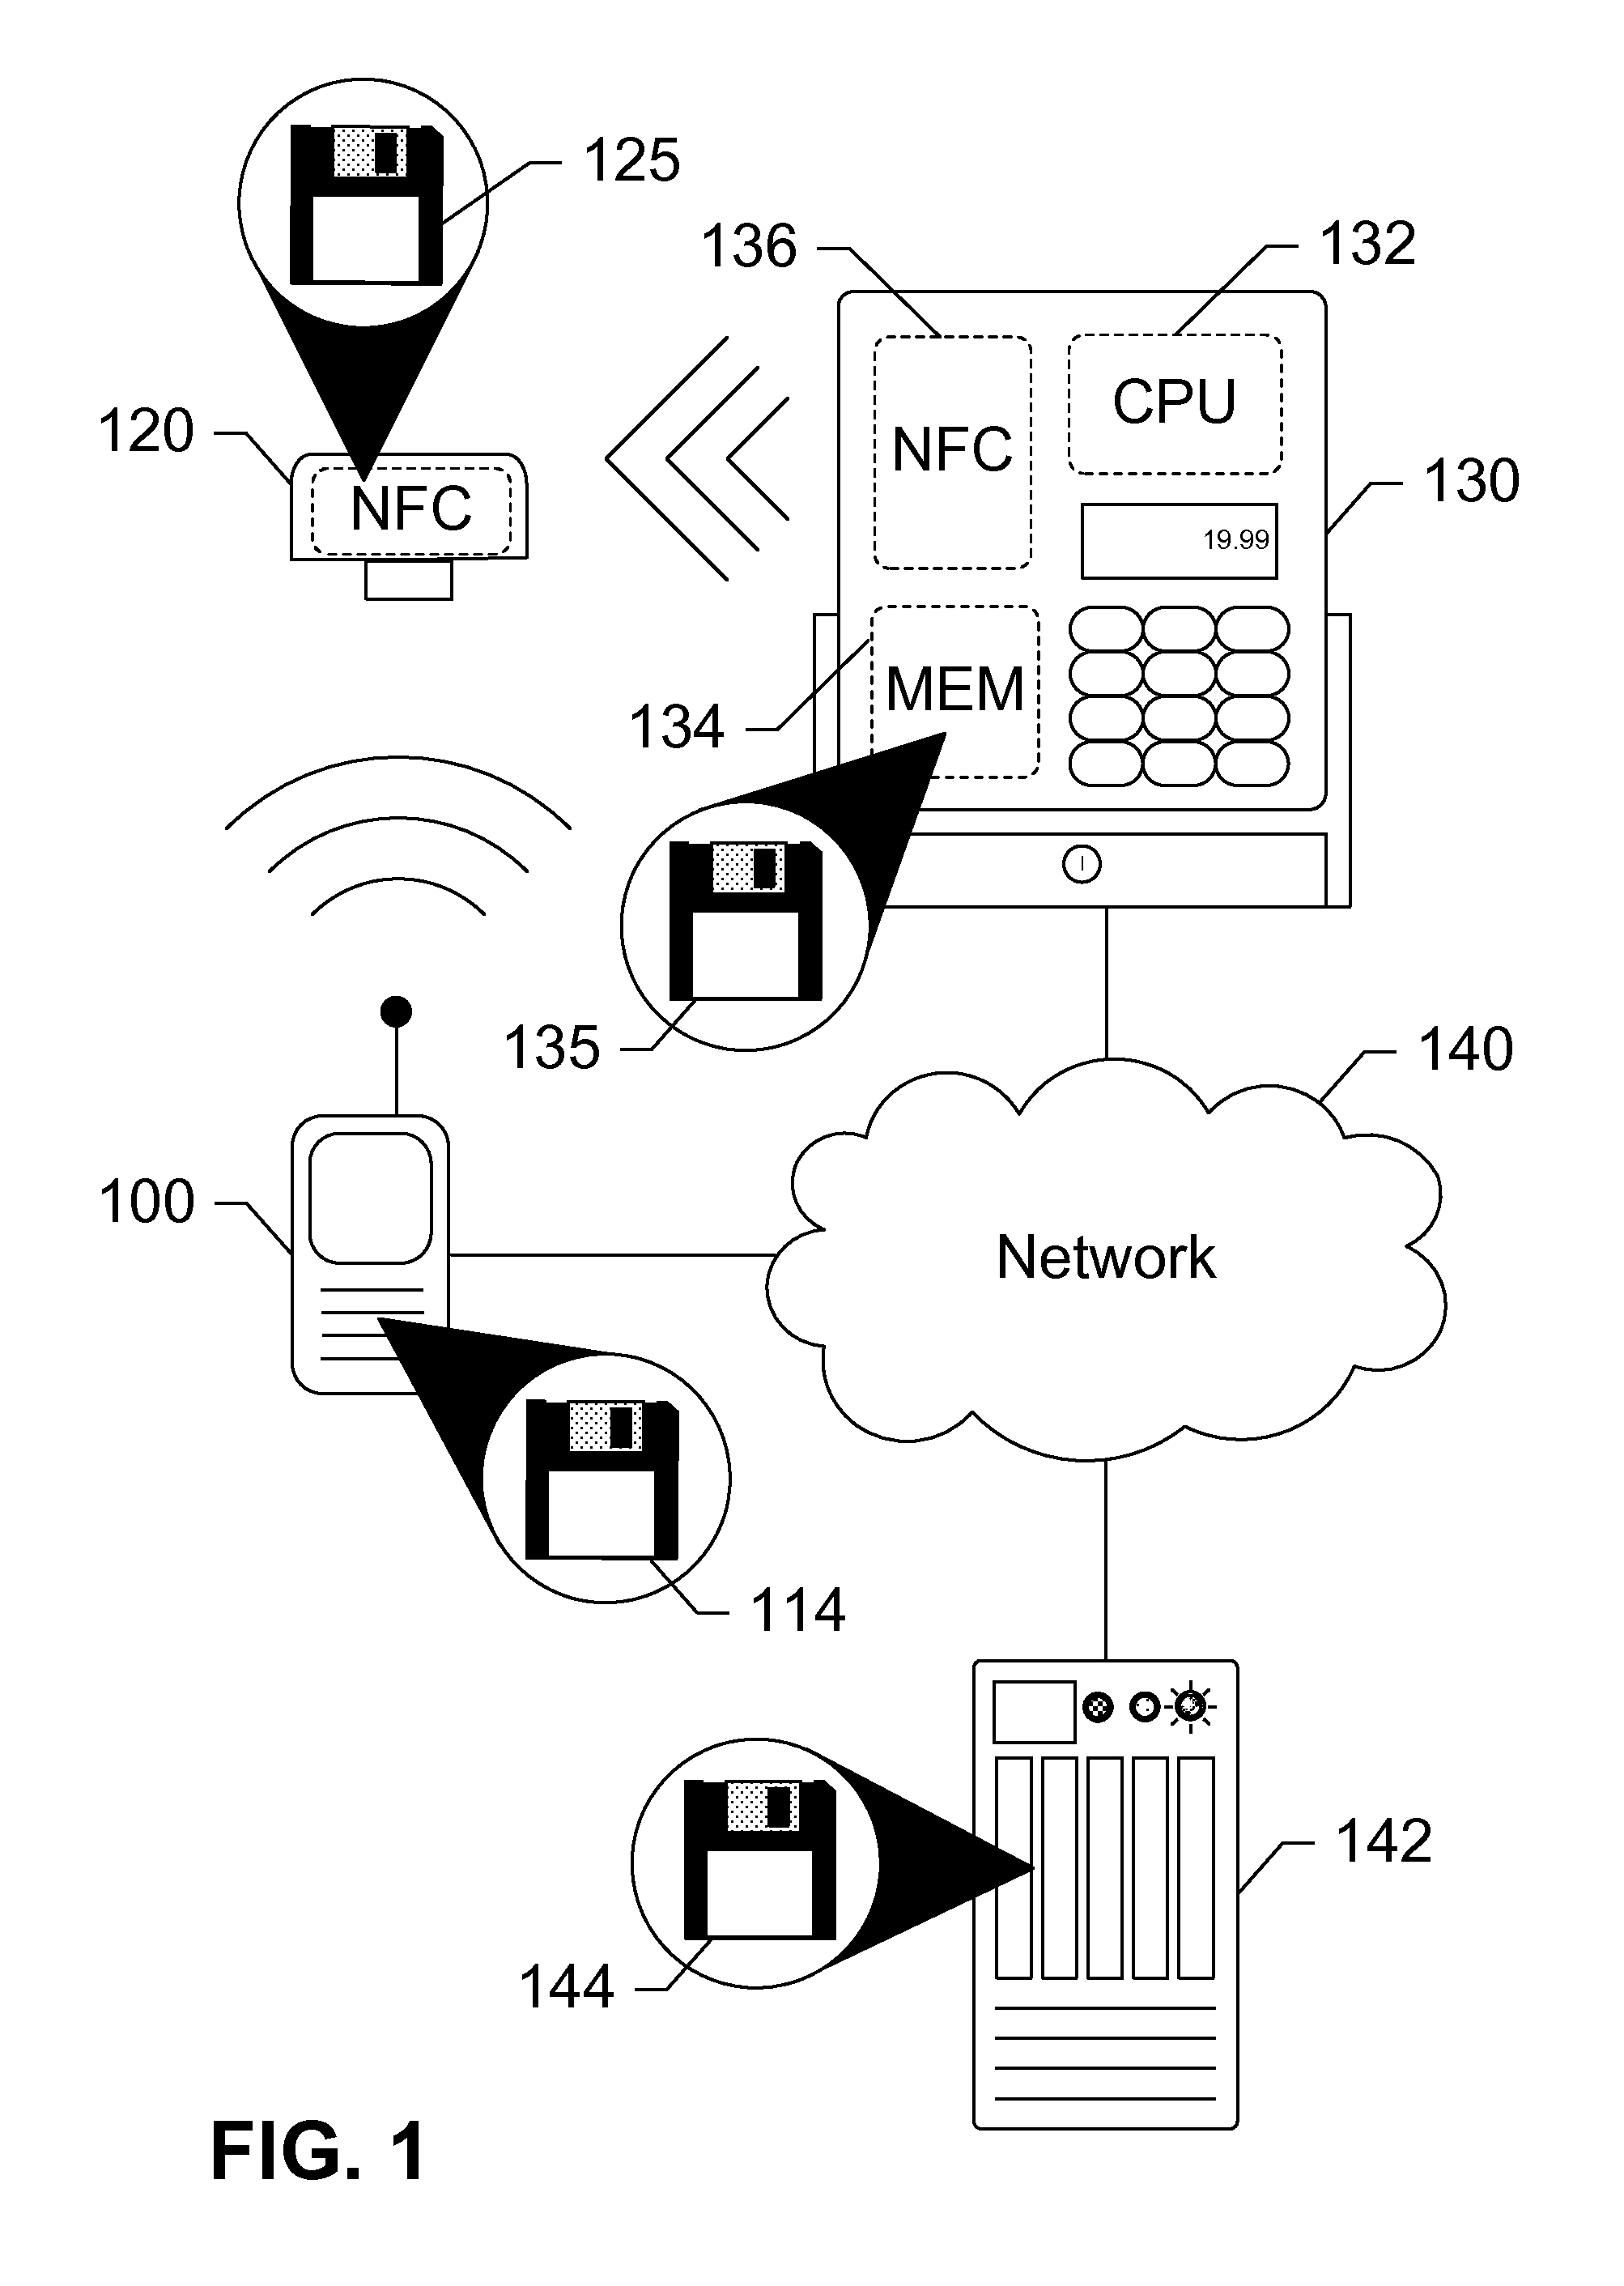 Security Token for Mobile Near Field Communication Transactions